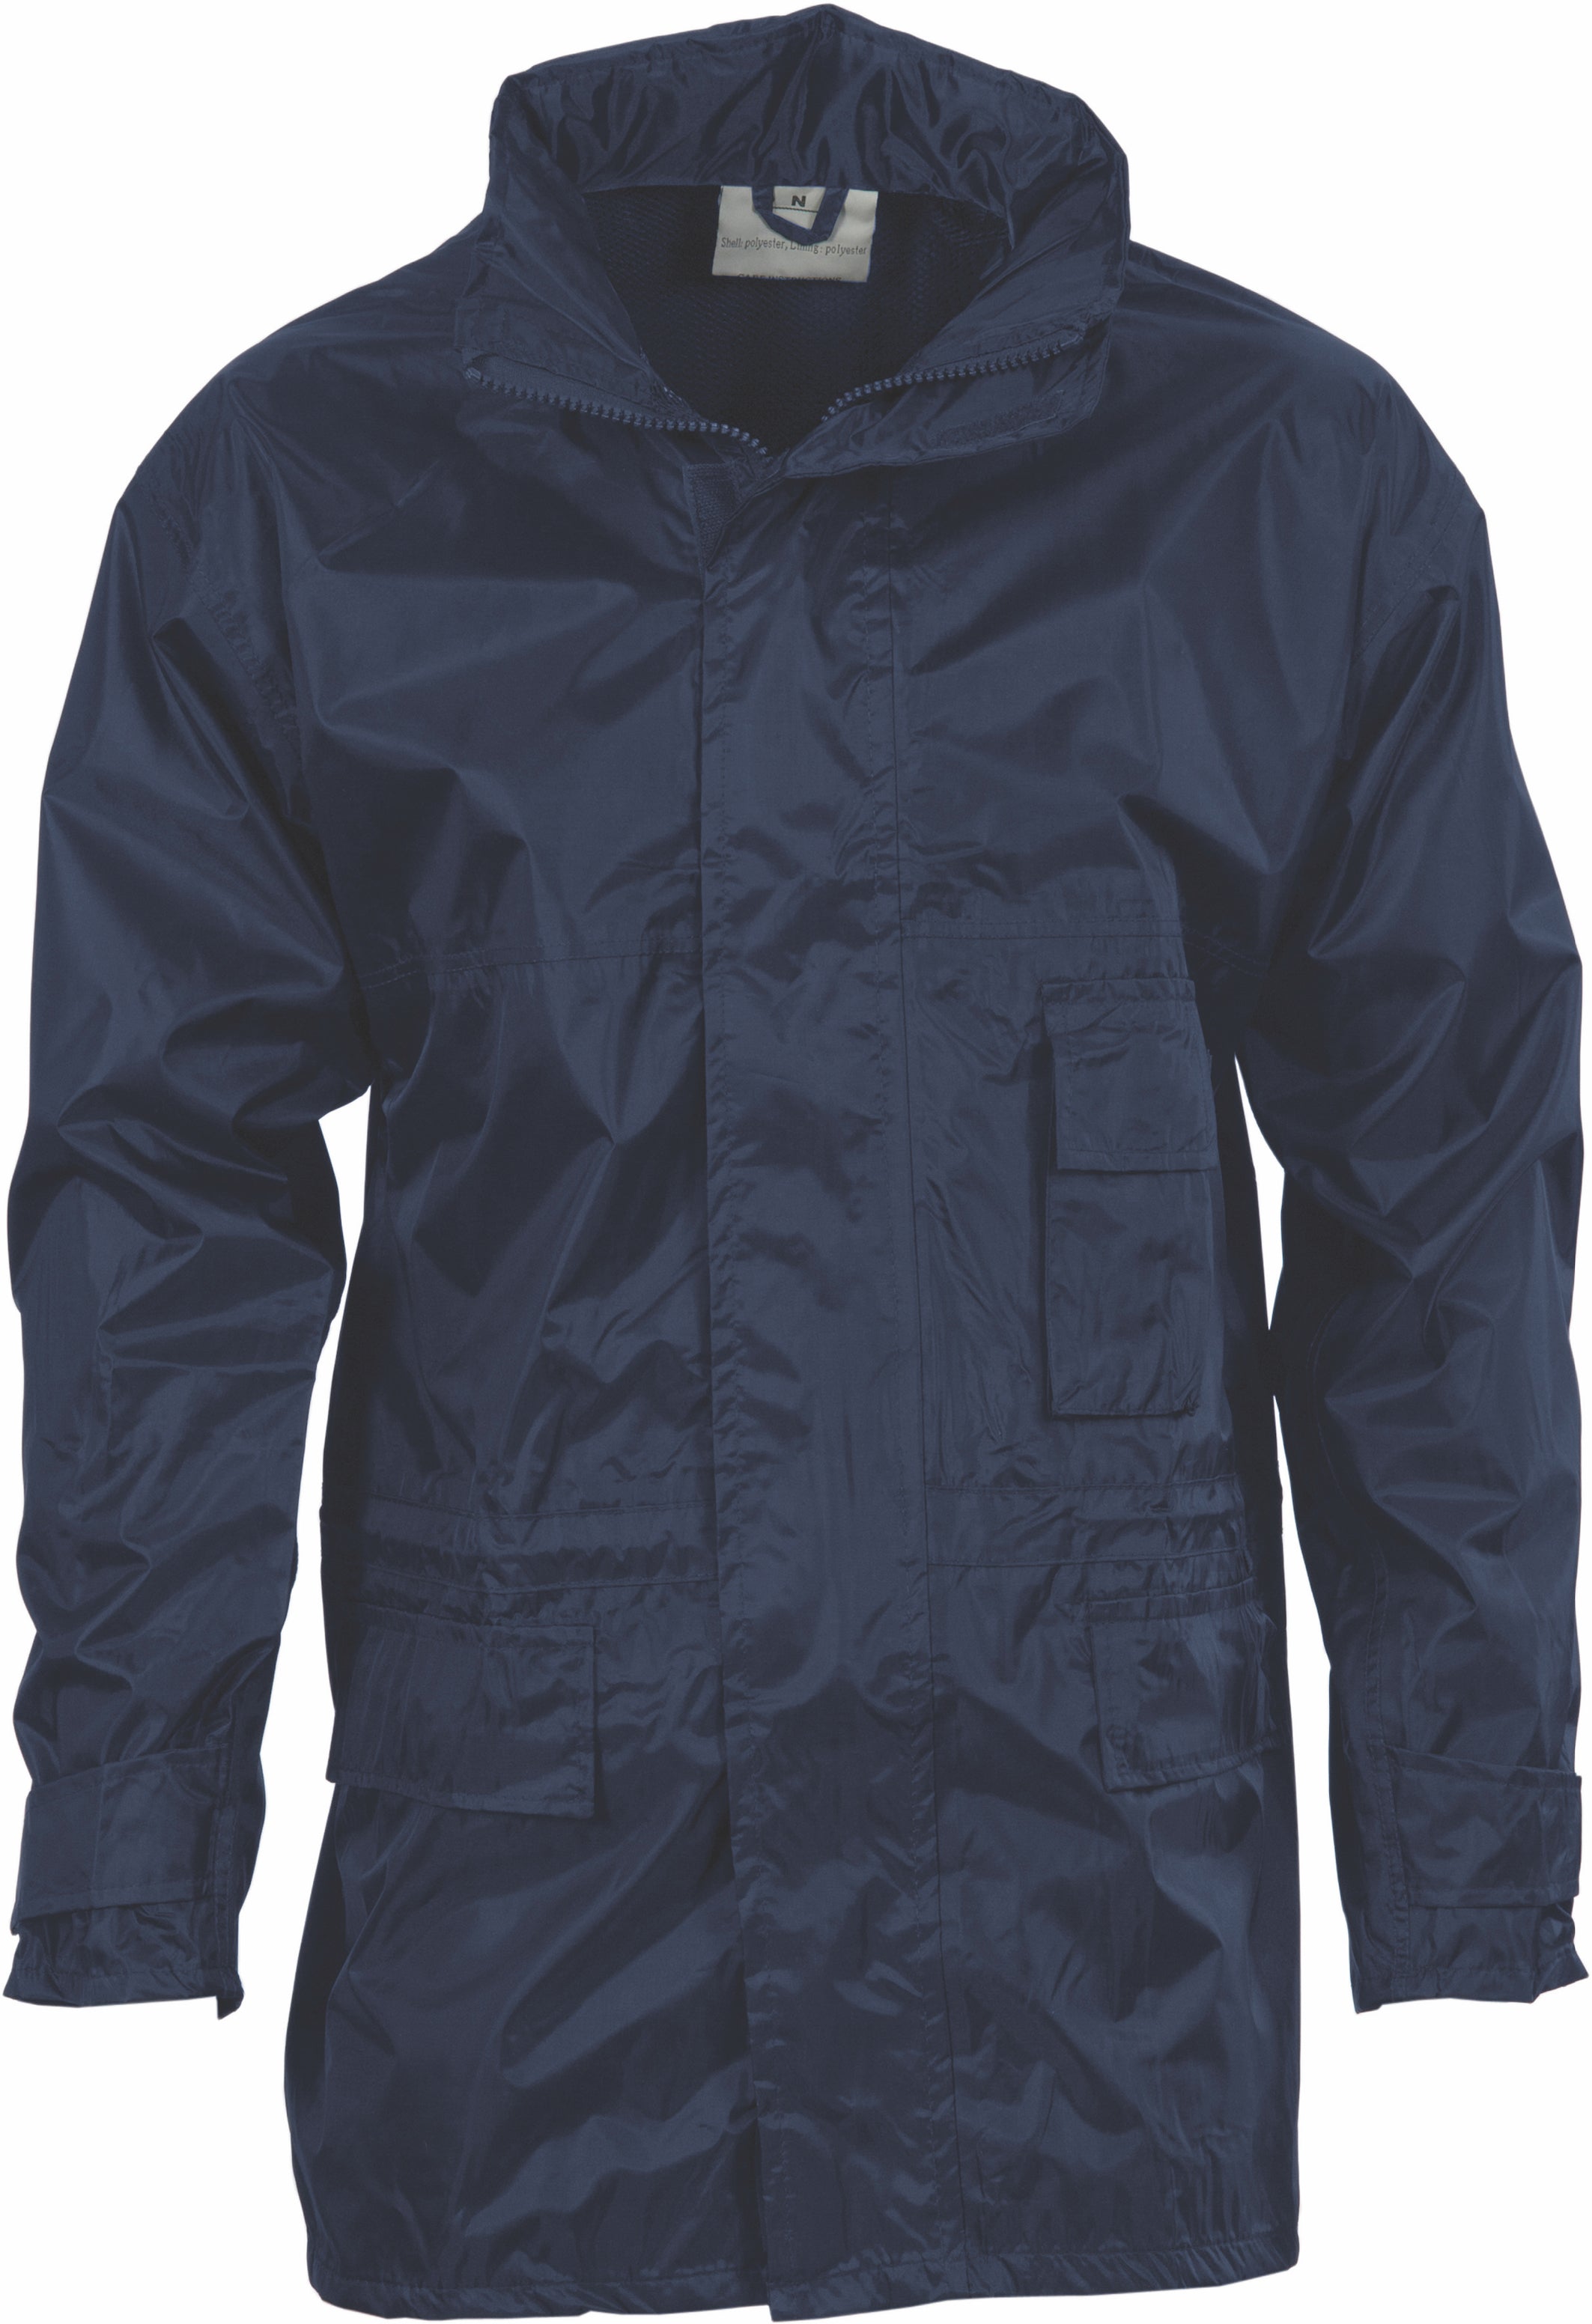 DNC - 3706 Polyester-Coated Water Proof Rain Jacket